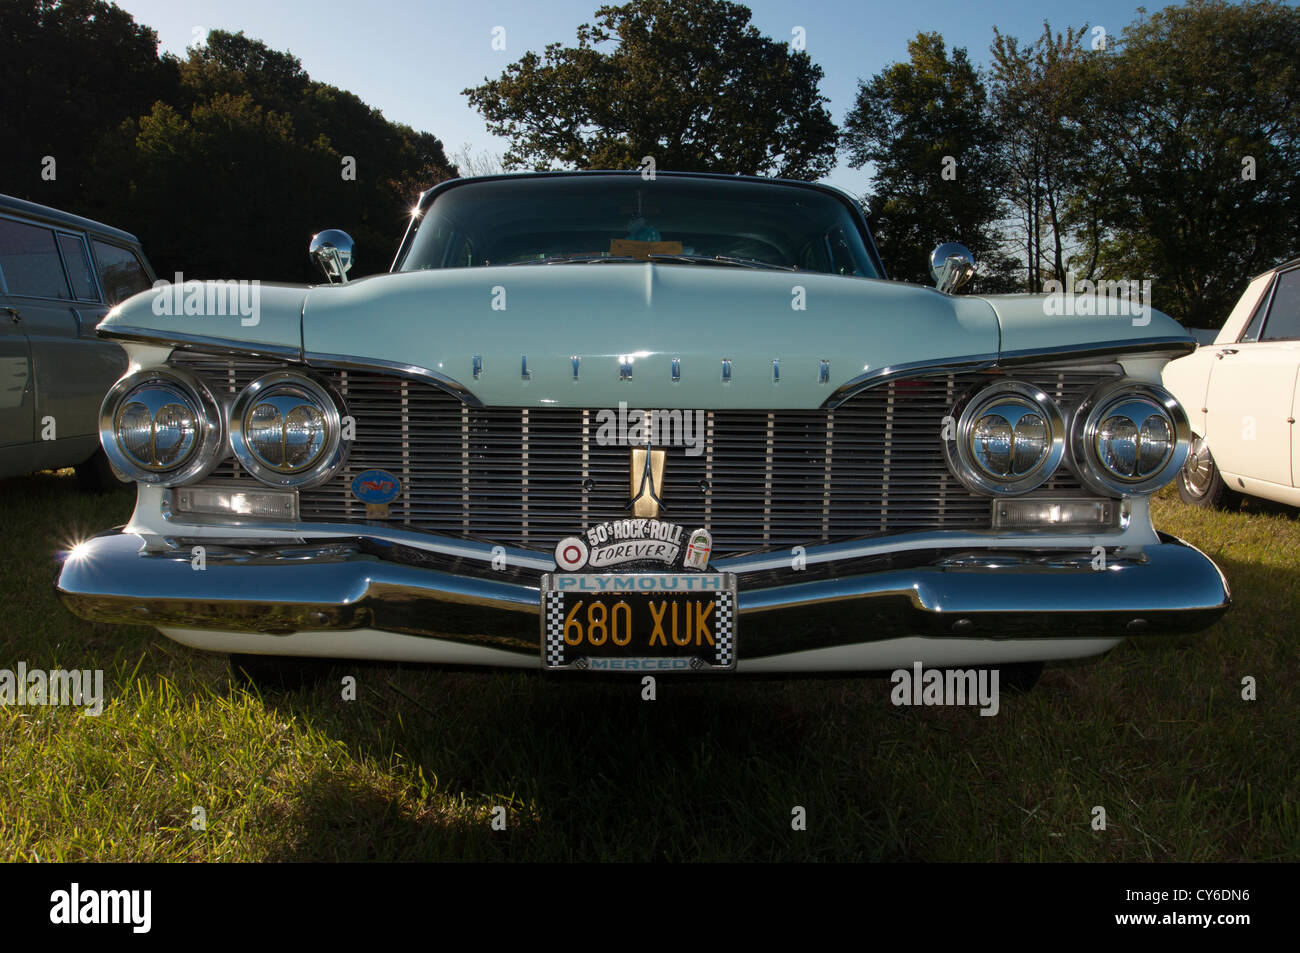 An American classic, the Plymouth Belvadere 4 door Sedan, proudly shown off at a Classic Car and Steam Fair Stock Photo